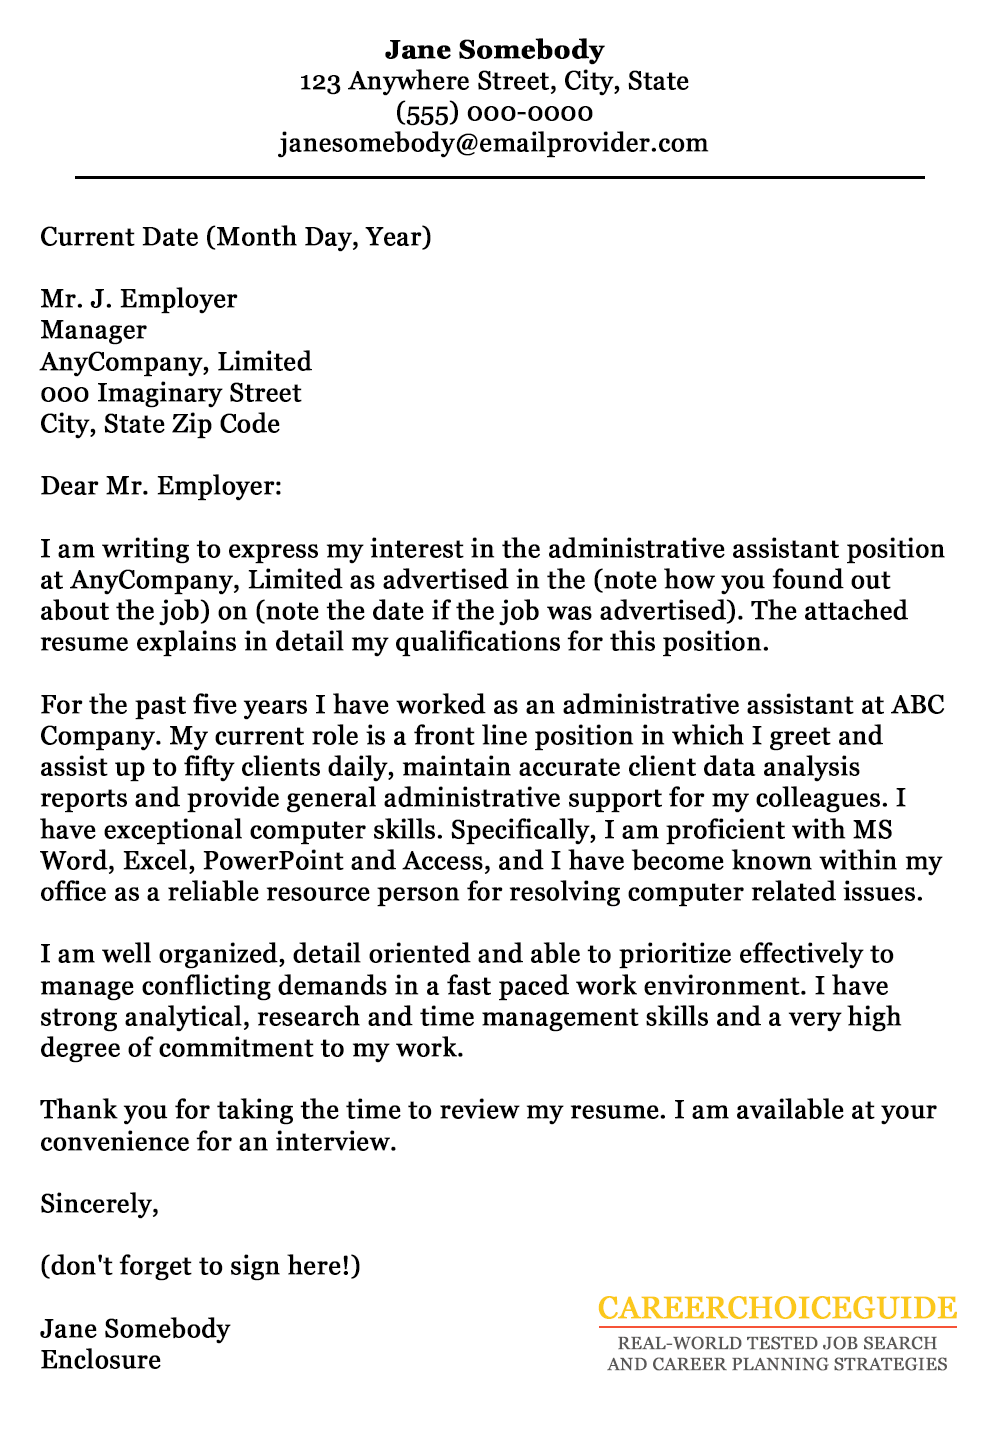 Letter Of Interest Example For Administrative Assistant ...